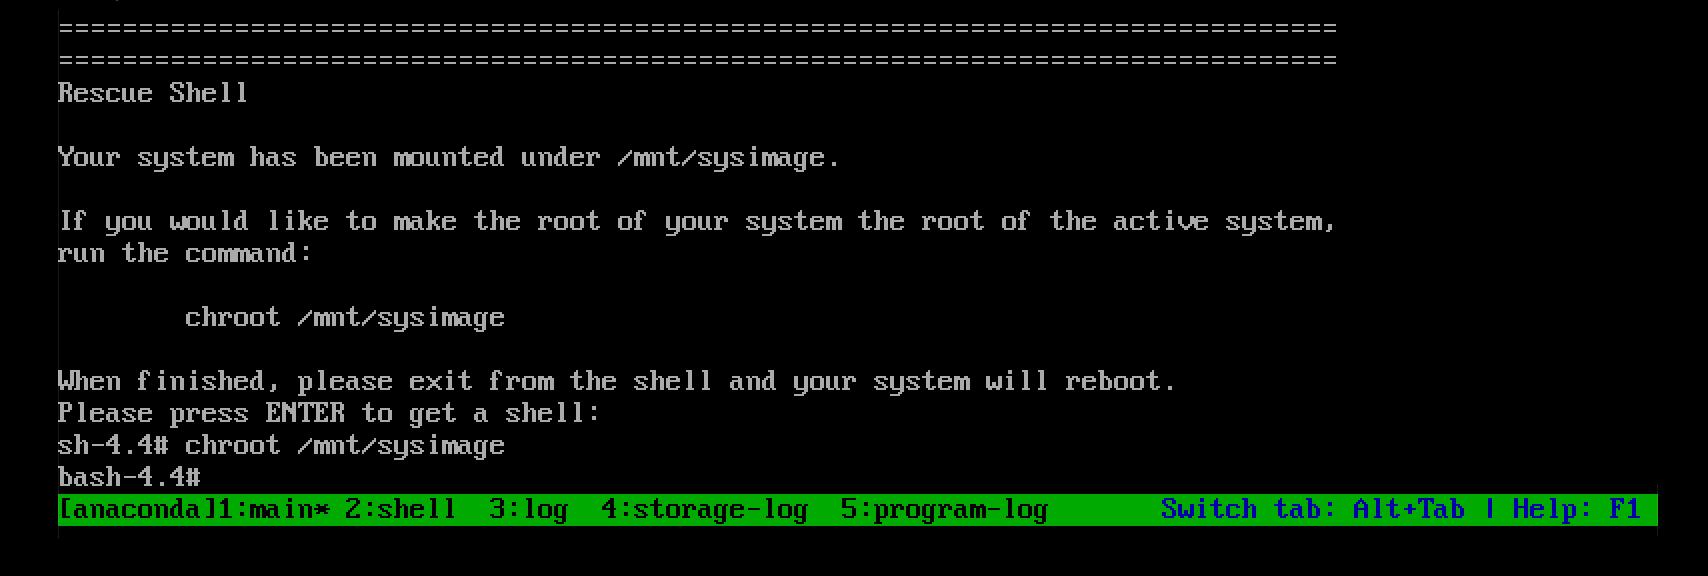 Screenshot of the Rescue session after using the chroot command to change the apparent root directory to /mnt/sysimage